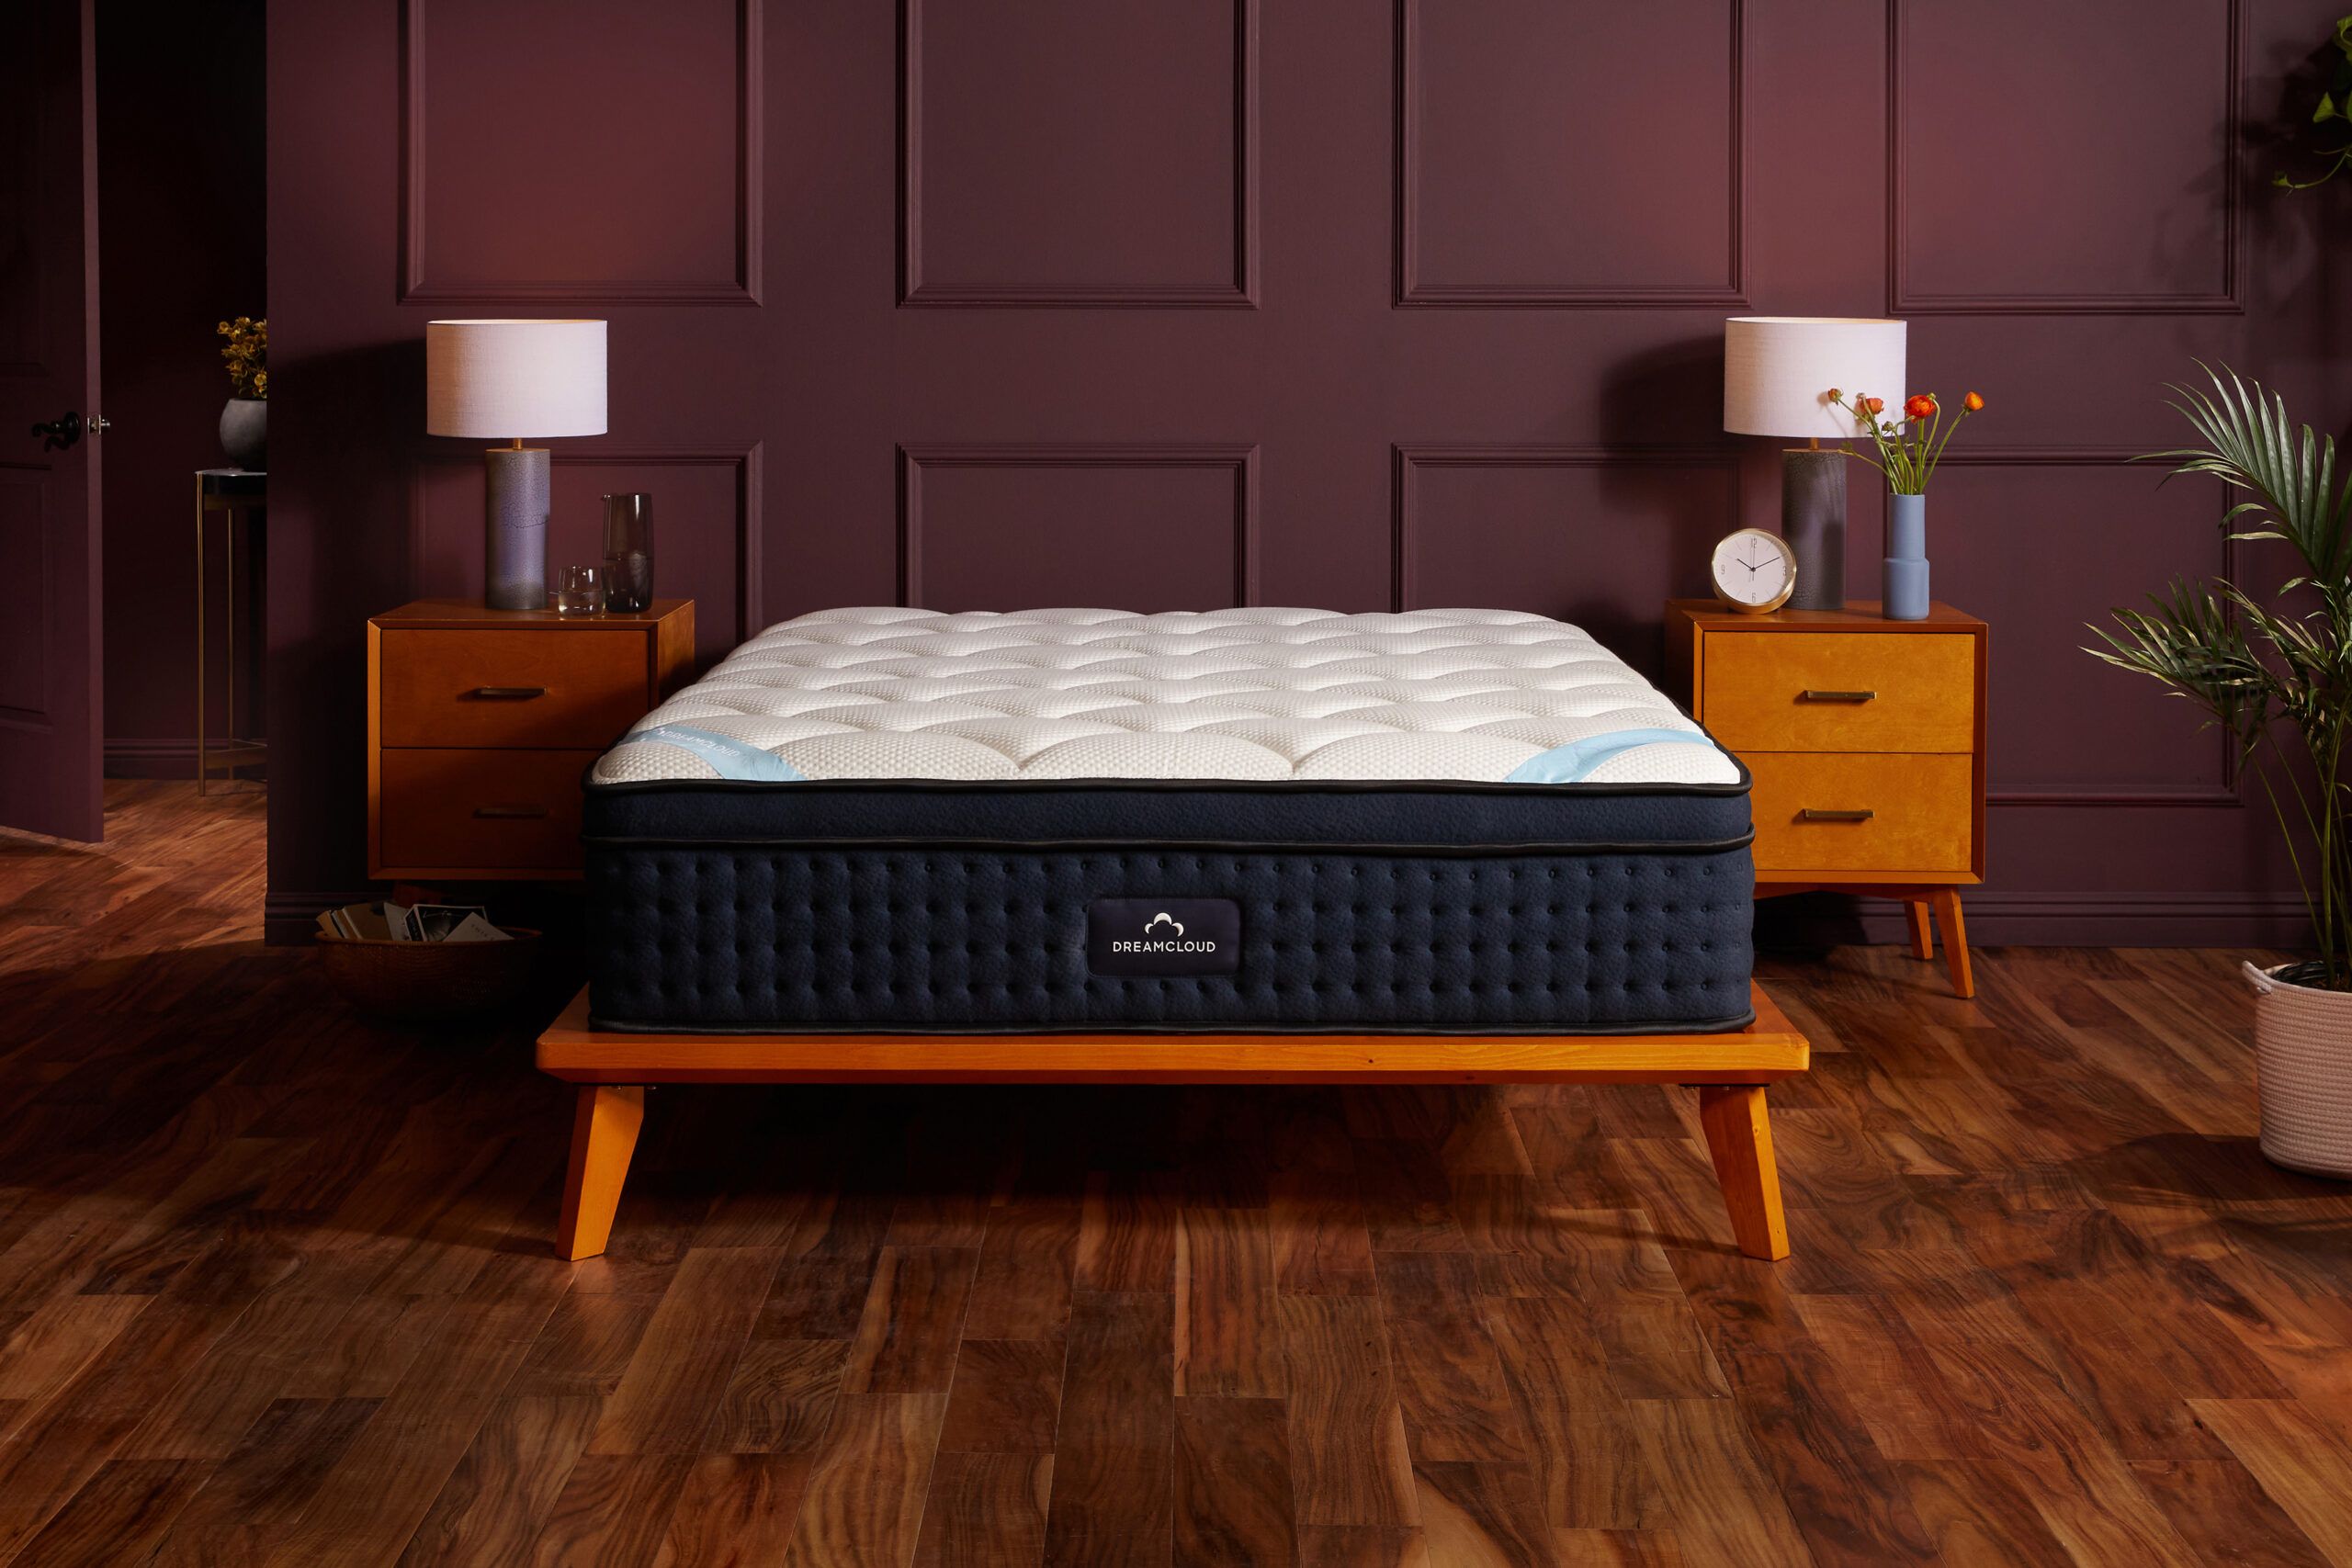 The Best Labor Day Mattress Sales of 2022 - Take Up to $750 Off - This ...